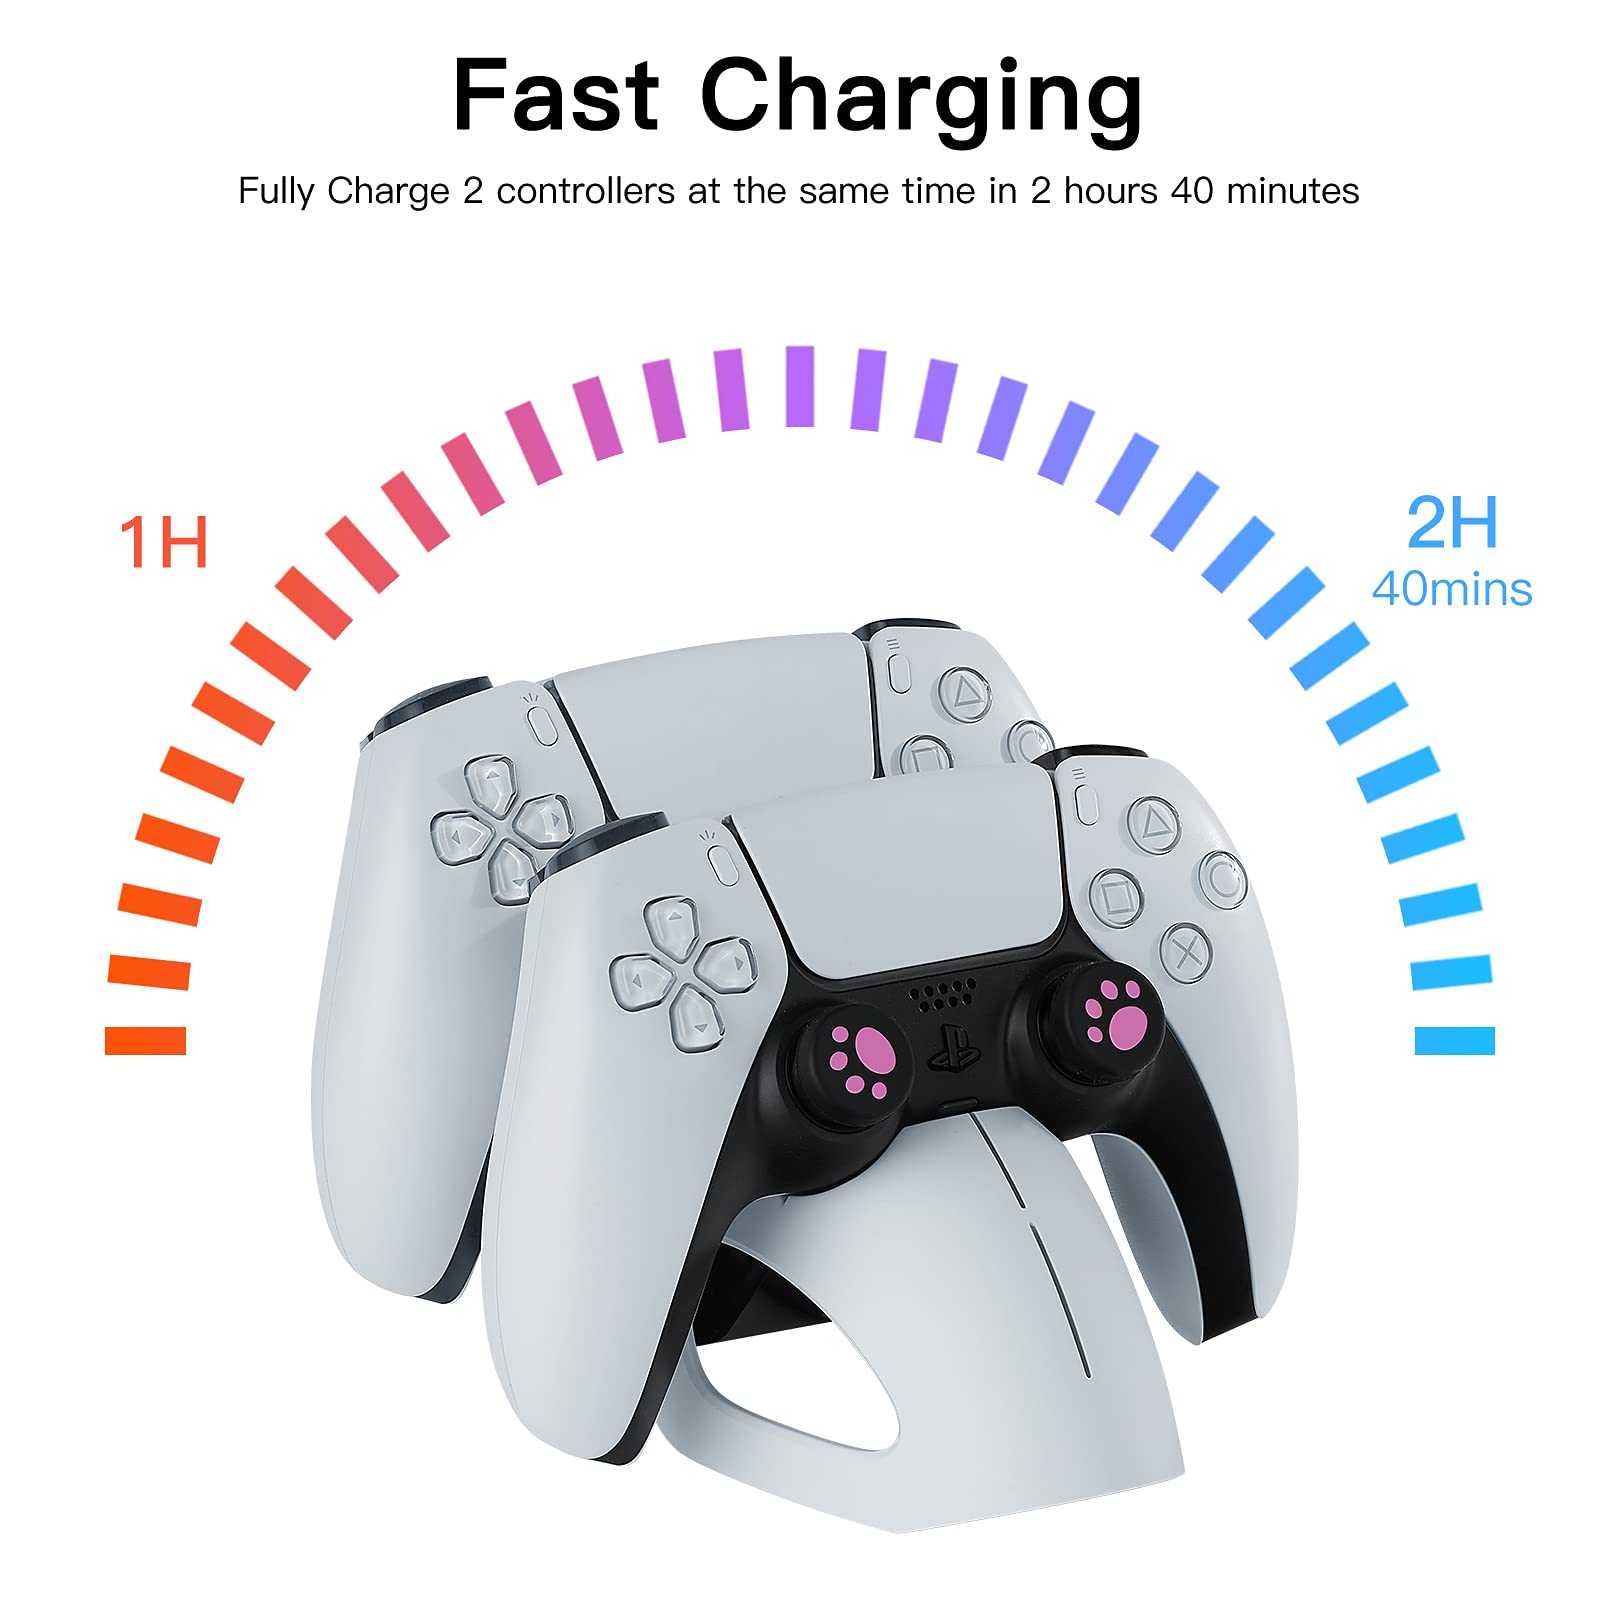 KINVOCA PS5 Controller Charger Station, High-Speed Charging Station for DualSense with LED Indicator, Charging Dock for Playstation 5 Controllers - White